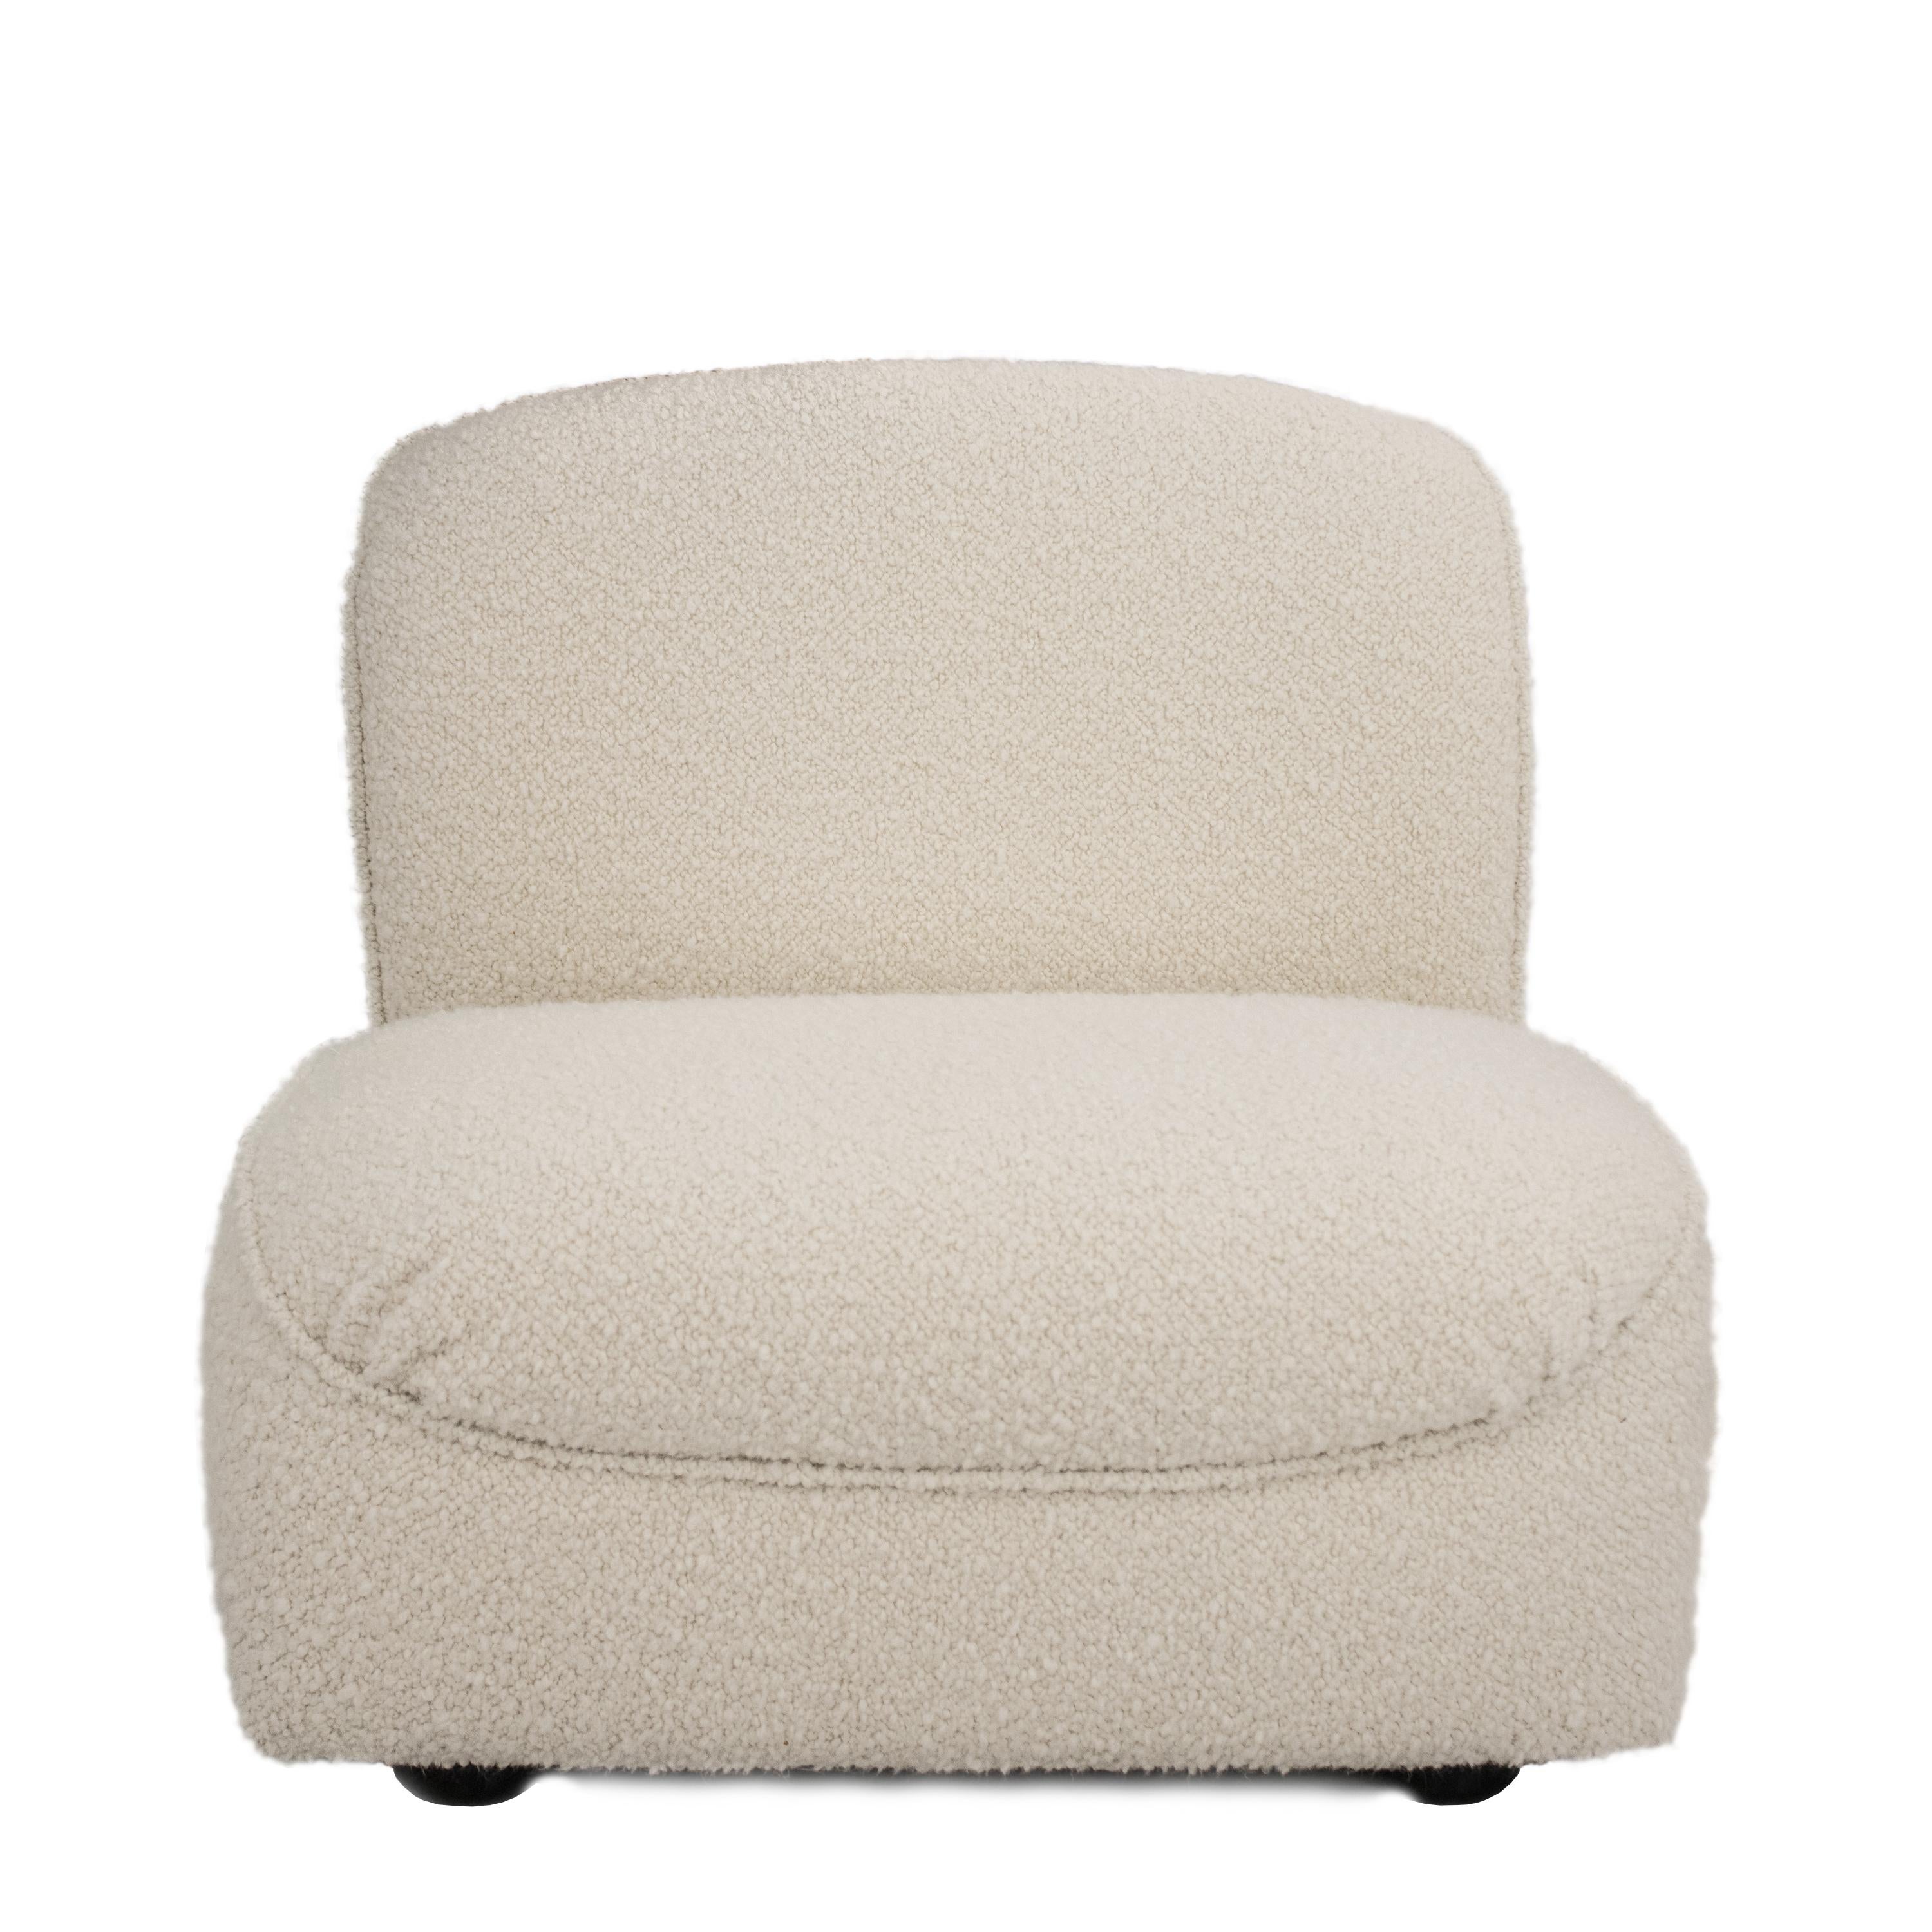 Modular Italian armchair circa 1970. 
The armchair is made of a solid wood structure covered in foam and upholstered by hand in a beige bouclé.
It is a comfortable and versatile modular design that can be used independently or by grouping several